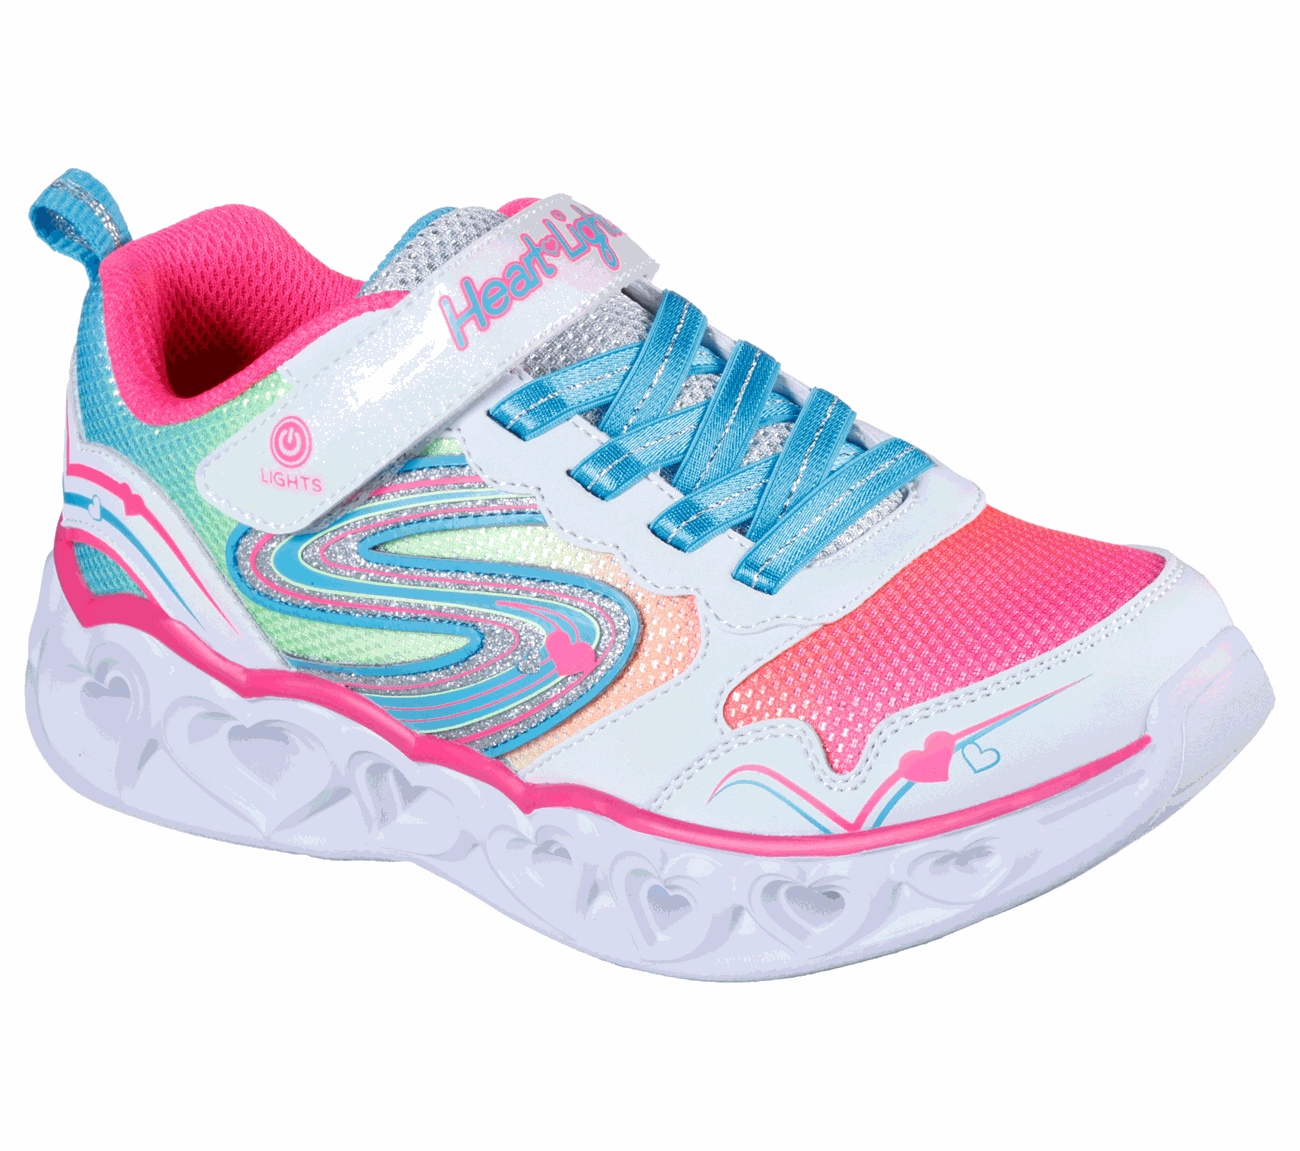 skechers baby shoes canada